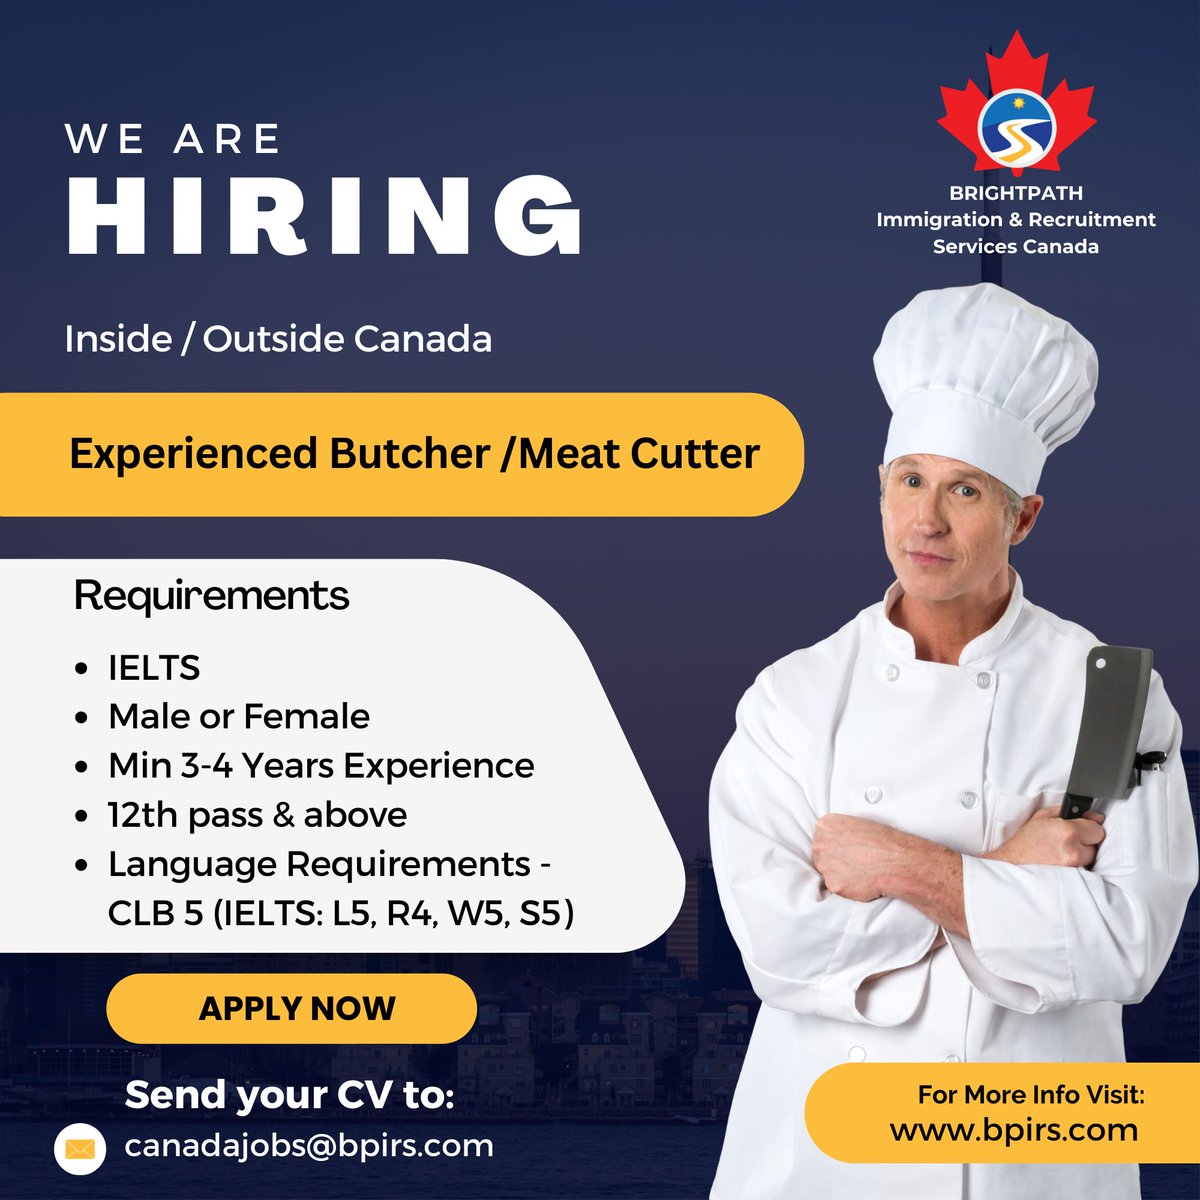 We're Hiring! Experienced Butcher/ Meat Cutter
Inside / Outside Canada

🍁CONTACT🍁
📧: canadajobs@bpirs.com
🌐: bpirs.com

#bpirs #canadaimmigration #canada #workpermitcanada #hiringnow #cook #eperience #joboffering #meatcutter #experience #butcher